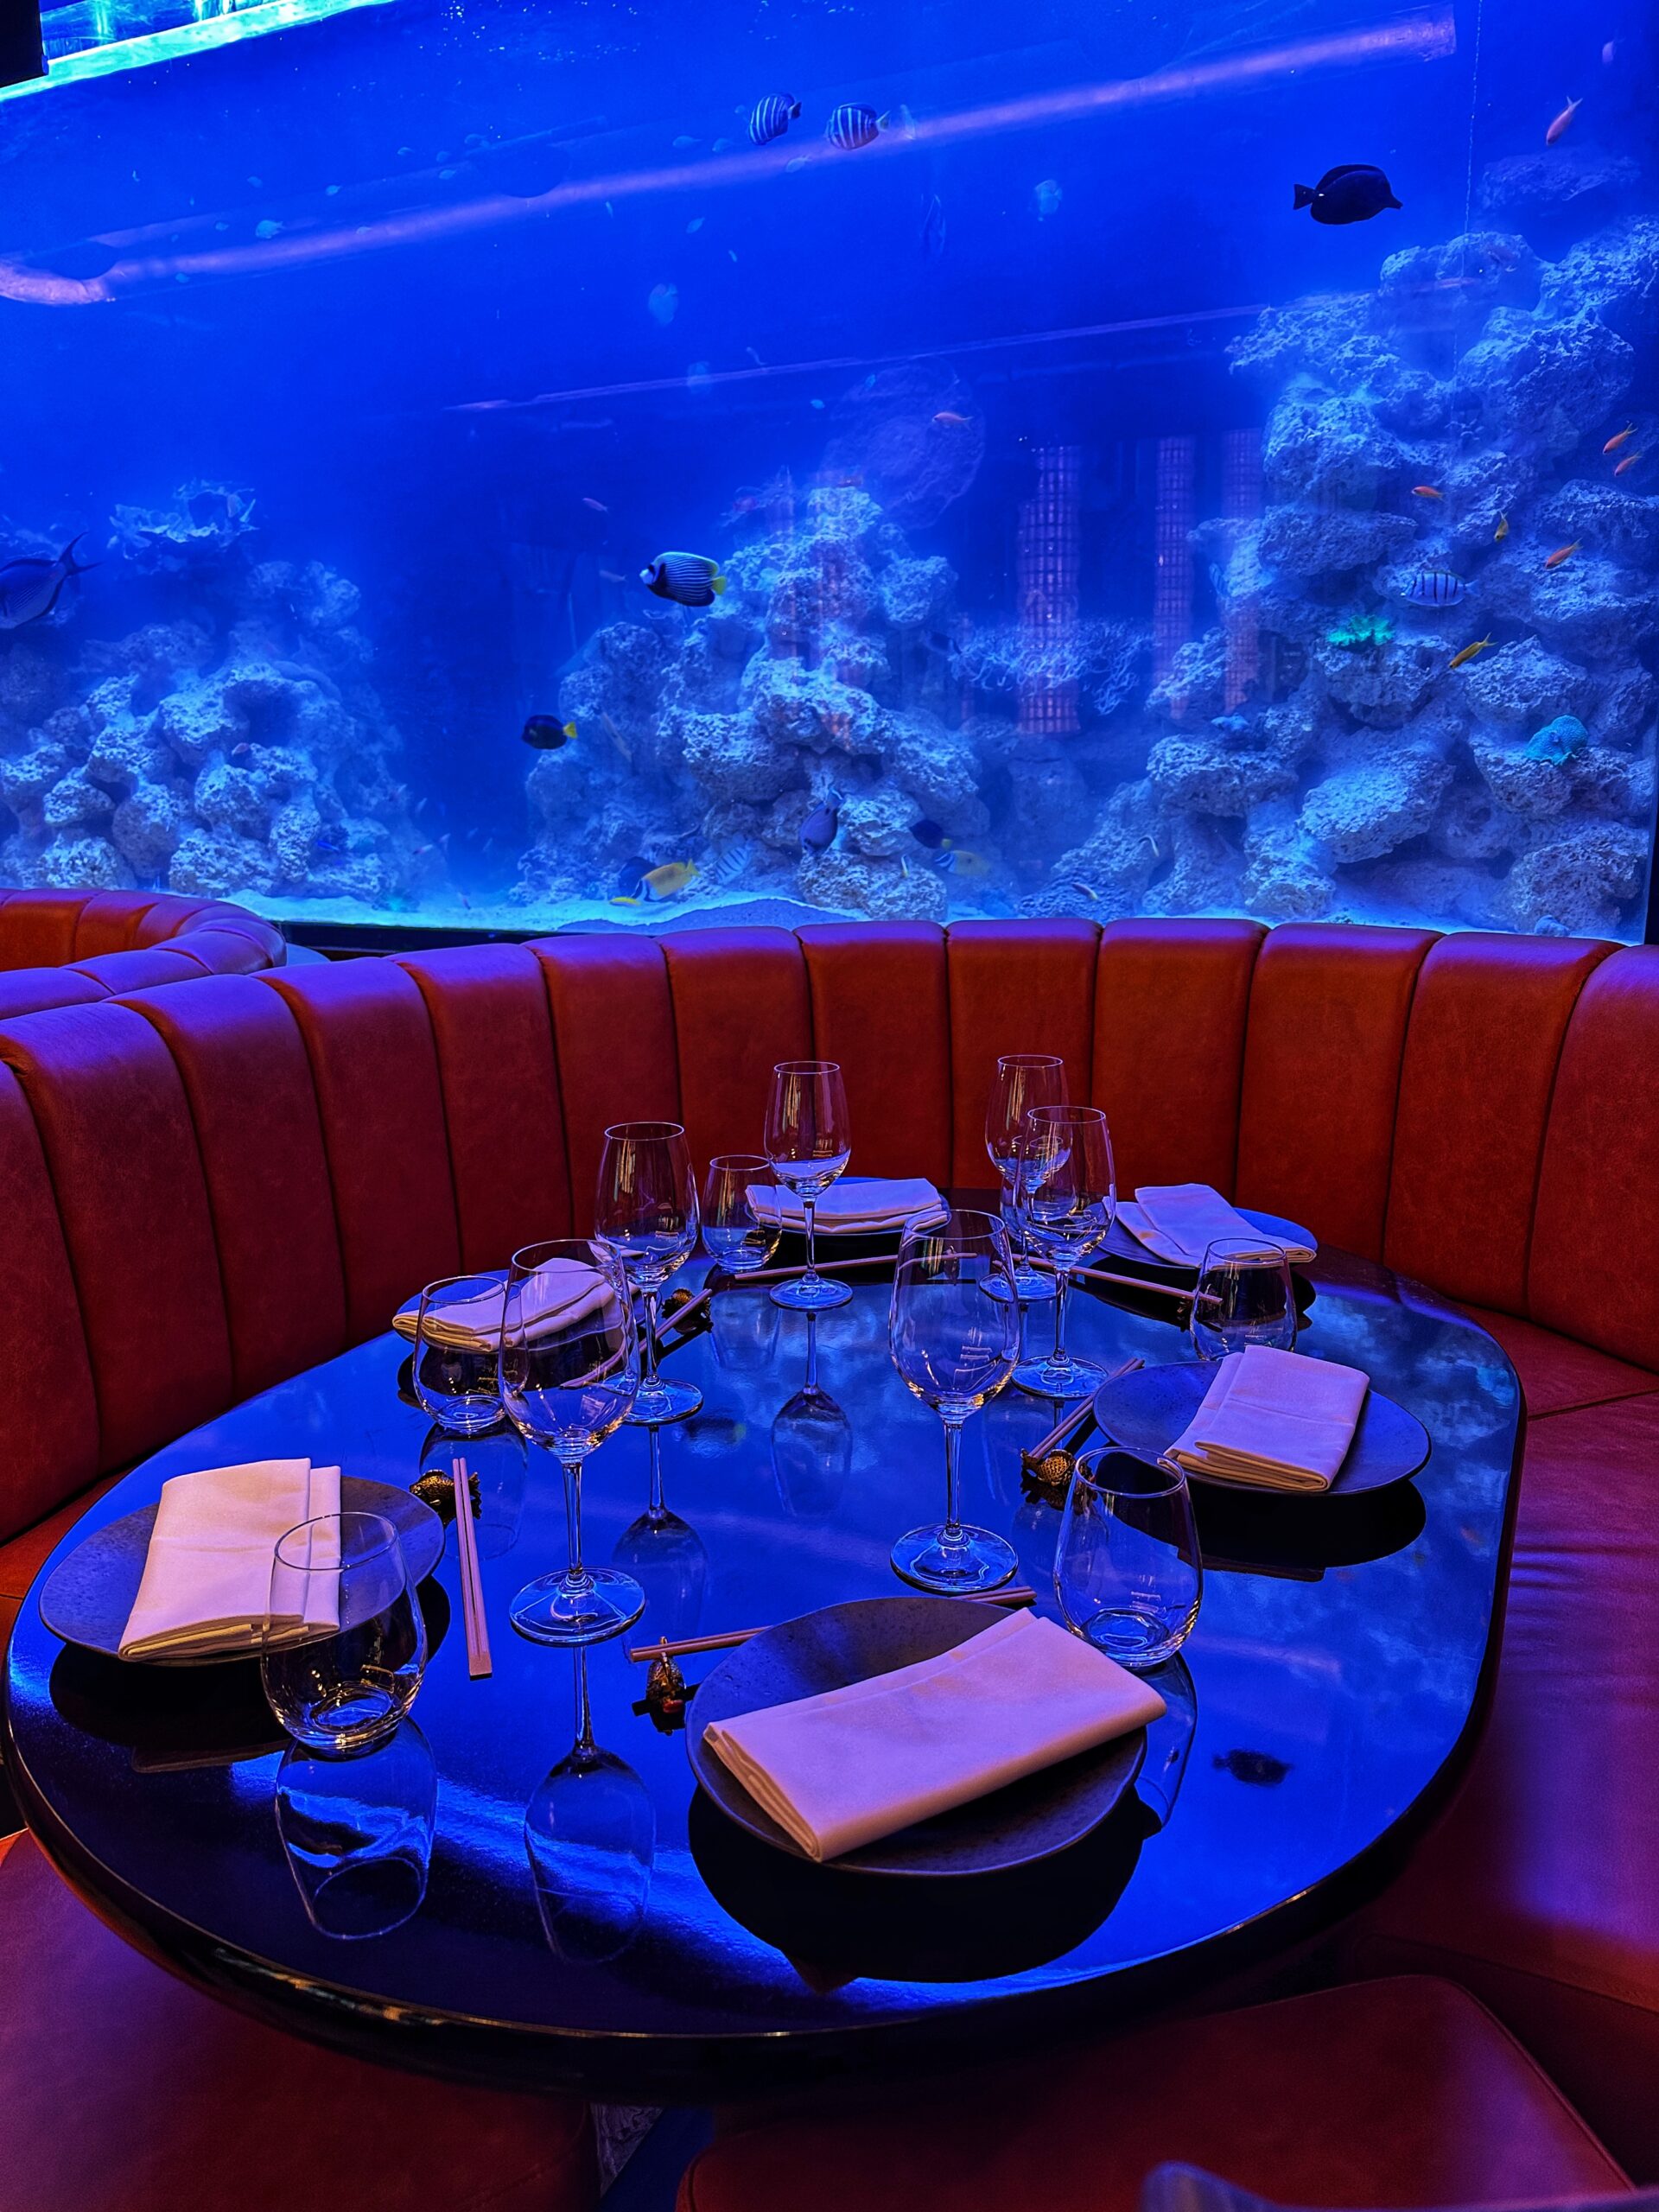 The fish tank at Sexy Fish Manchester in the private dining room